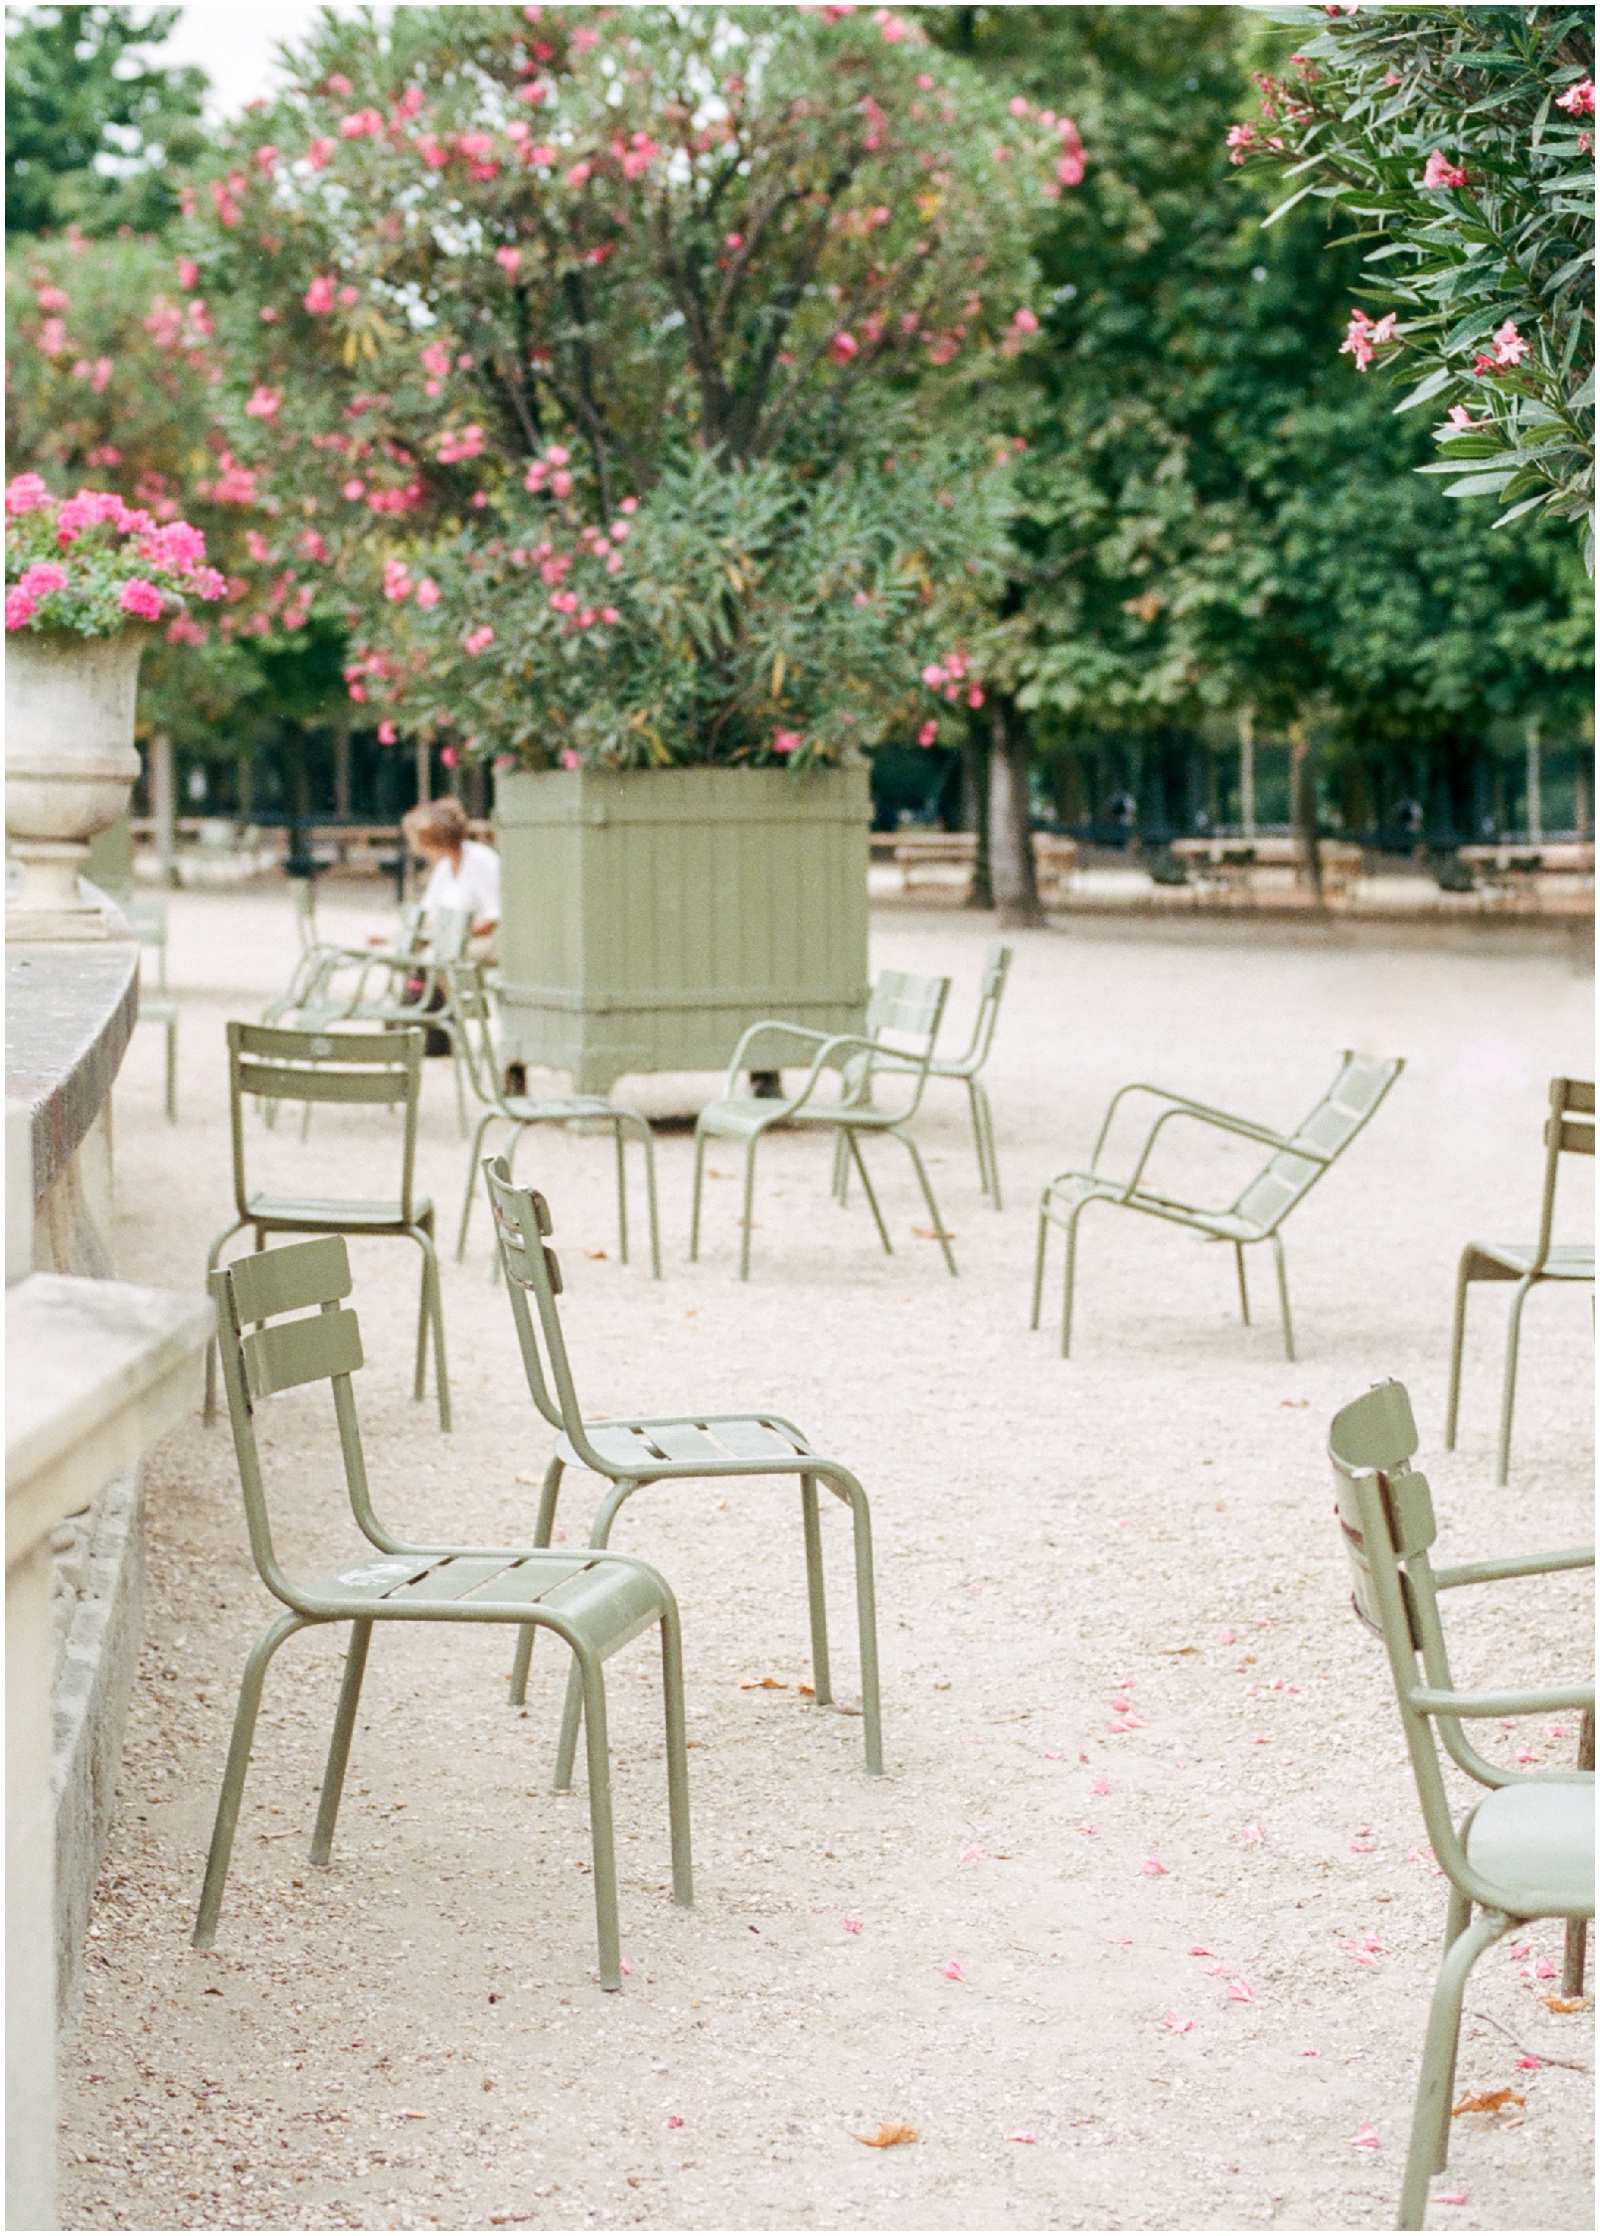 chairs in the luxembourg gardens in paris france